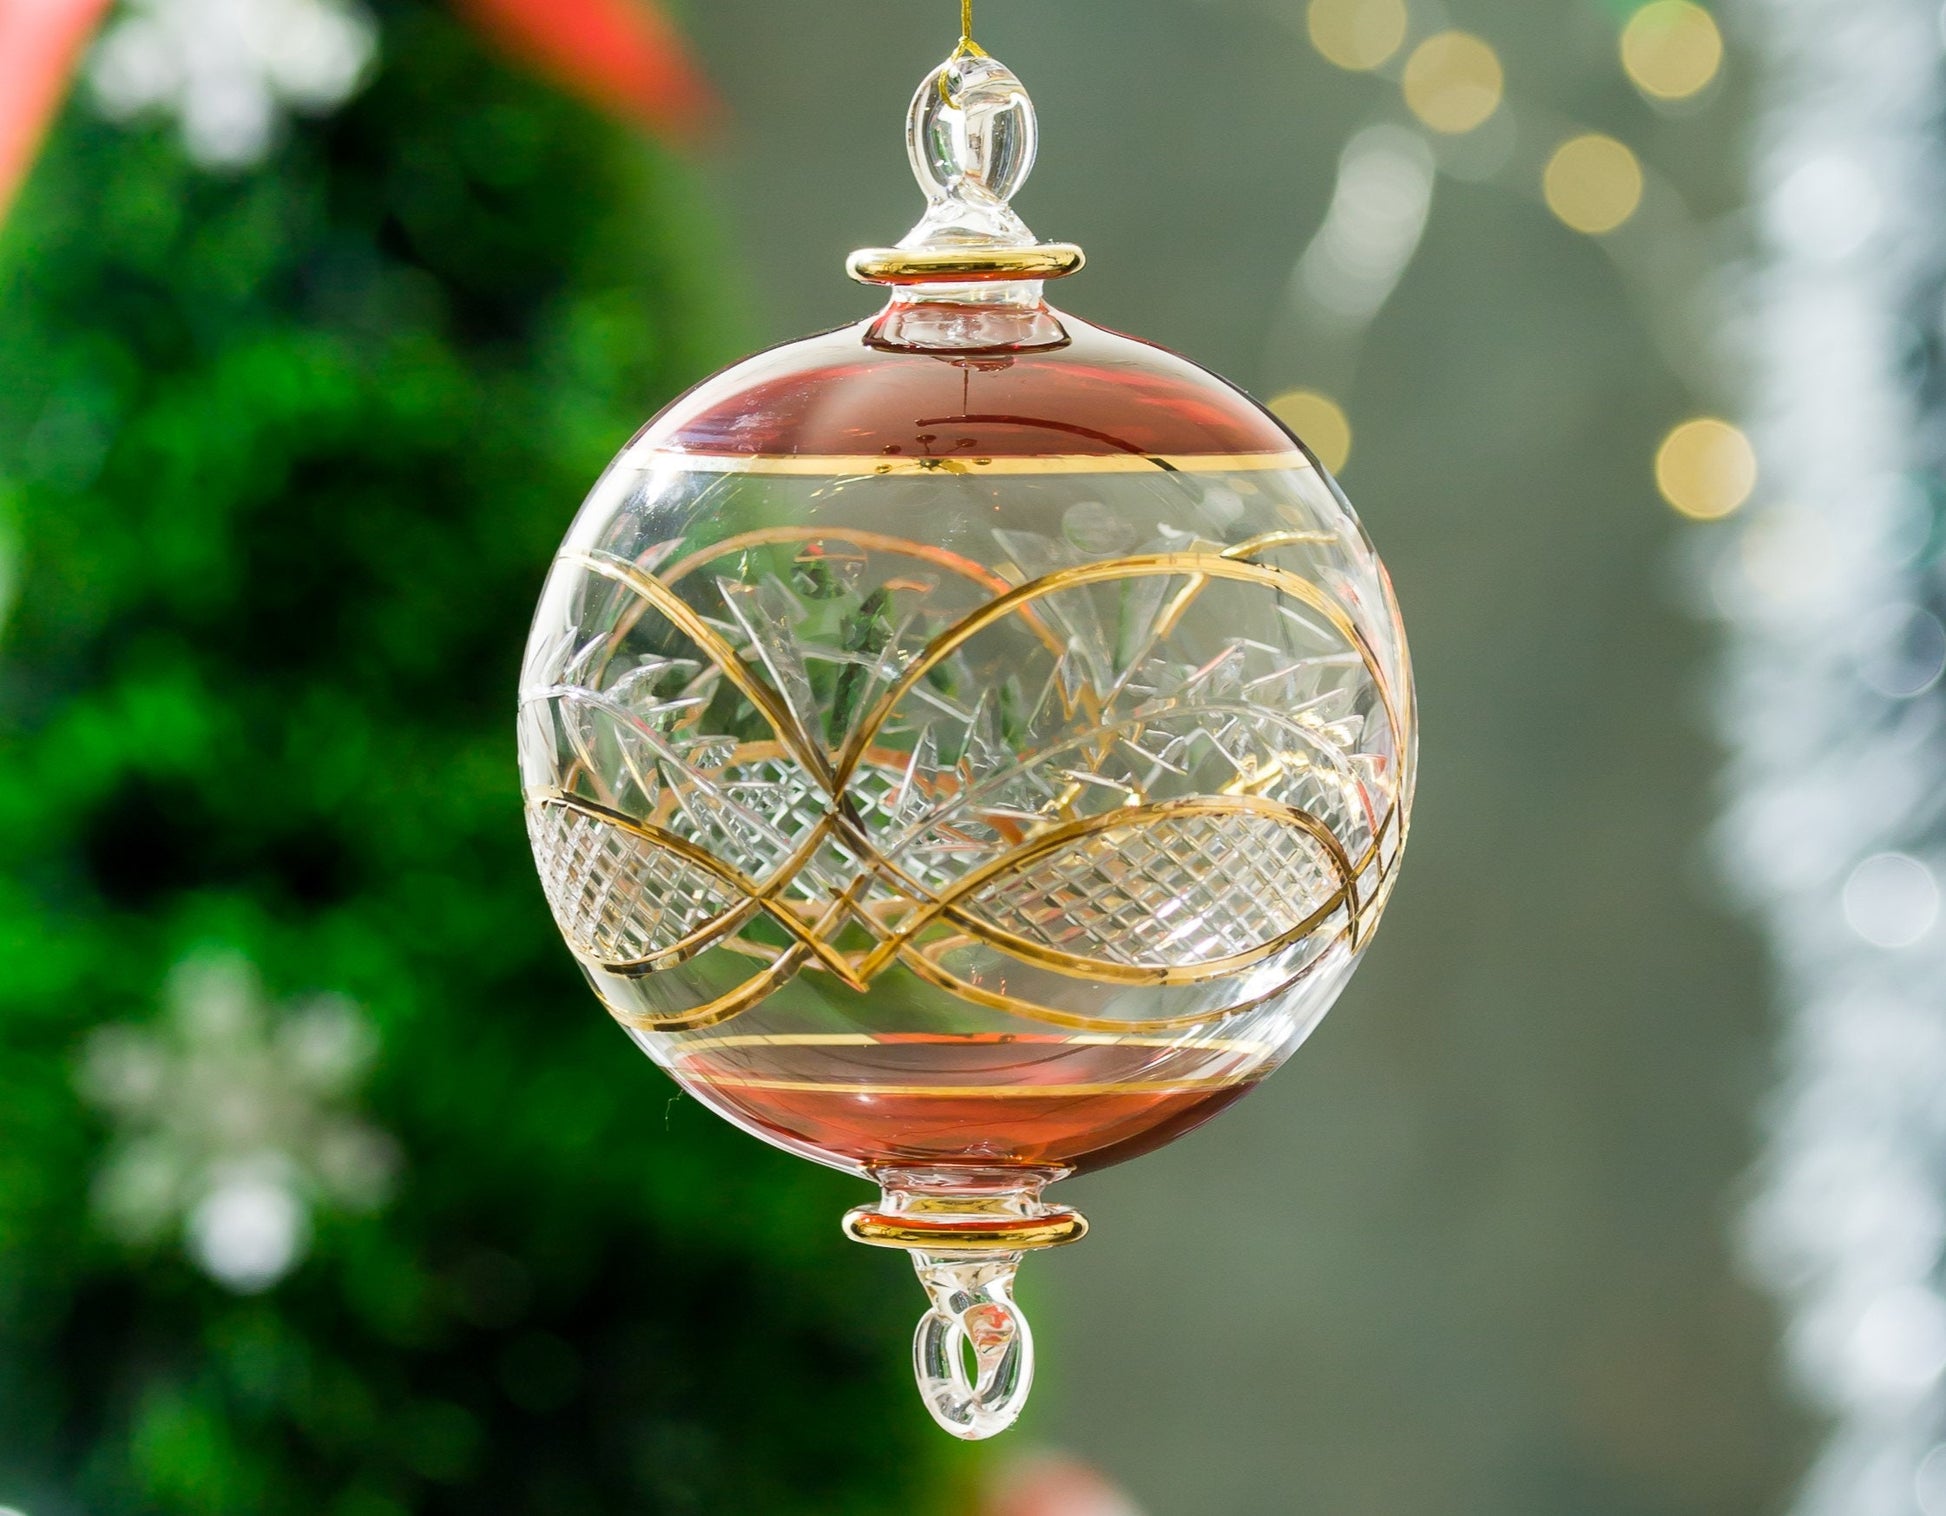 Vintage Christmas Ornaments with 14 K Gold Kirates , Tree Topper for Christmas Tree with Engraved Glass, Large Ornament Egyptian Blown Glass - Les Trois Pyramides 